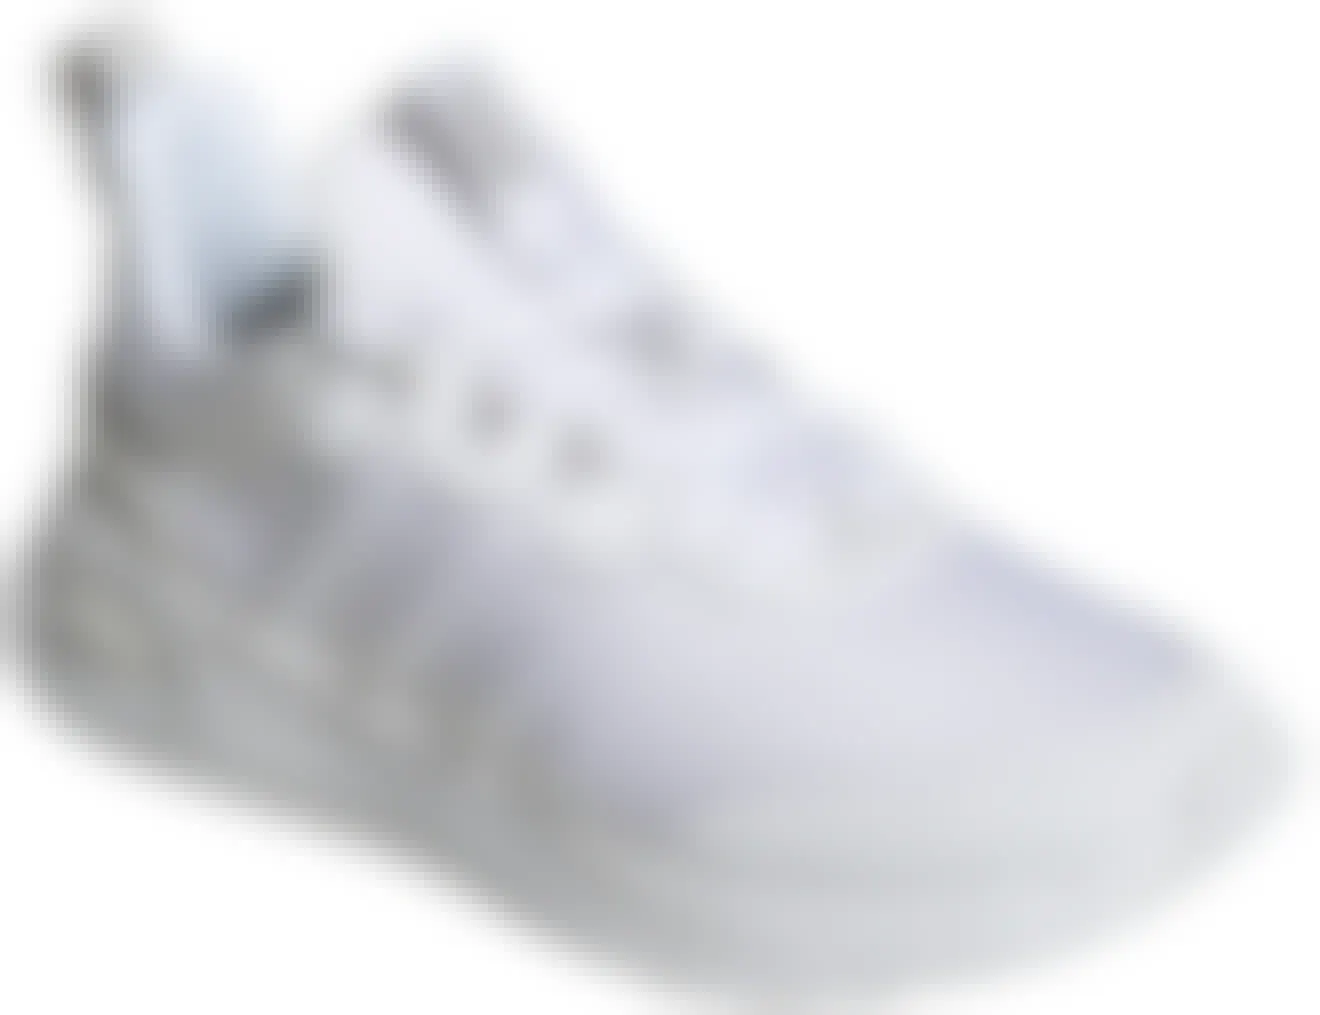 An Adidas Puremotion Super shoe on a white background.